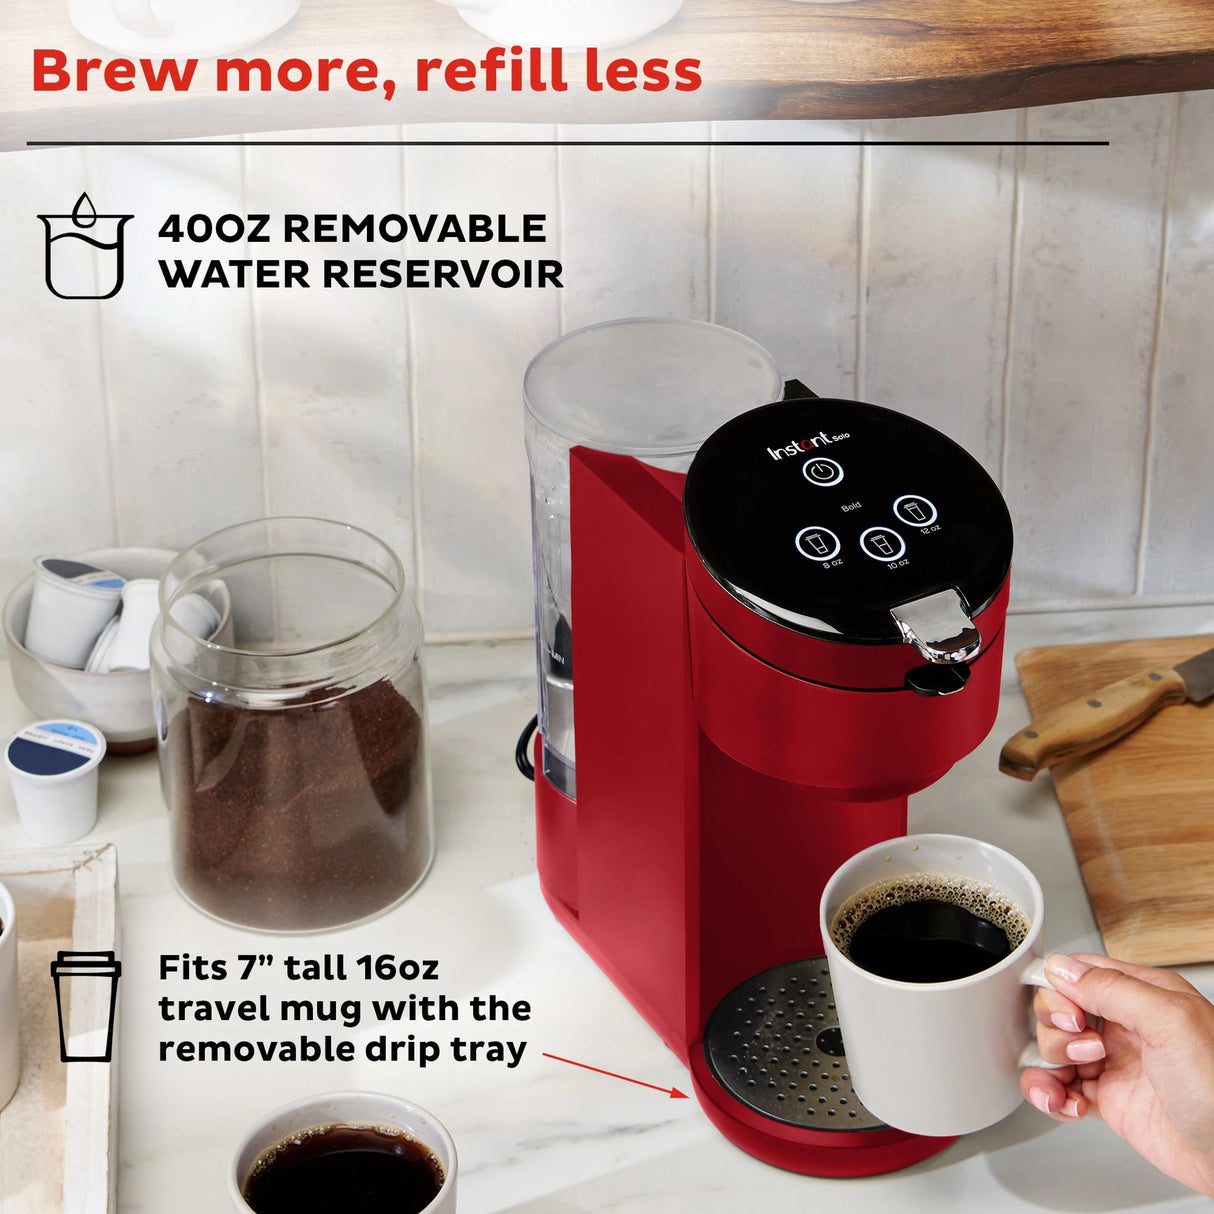  Instant Solo Maroon Single Serve Coffee Maker with text brew more, refill less